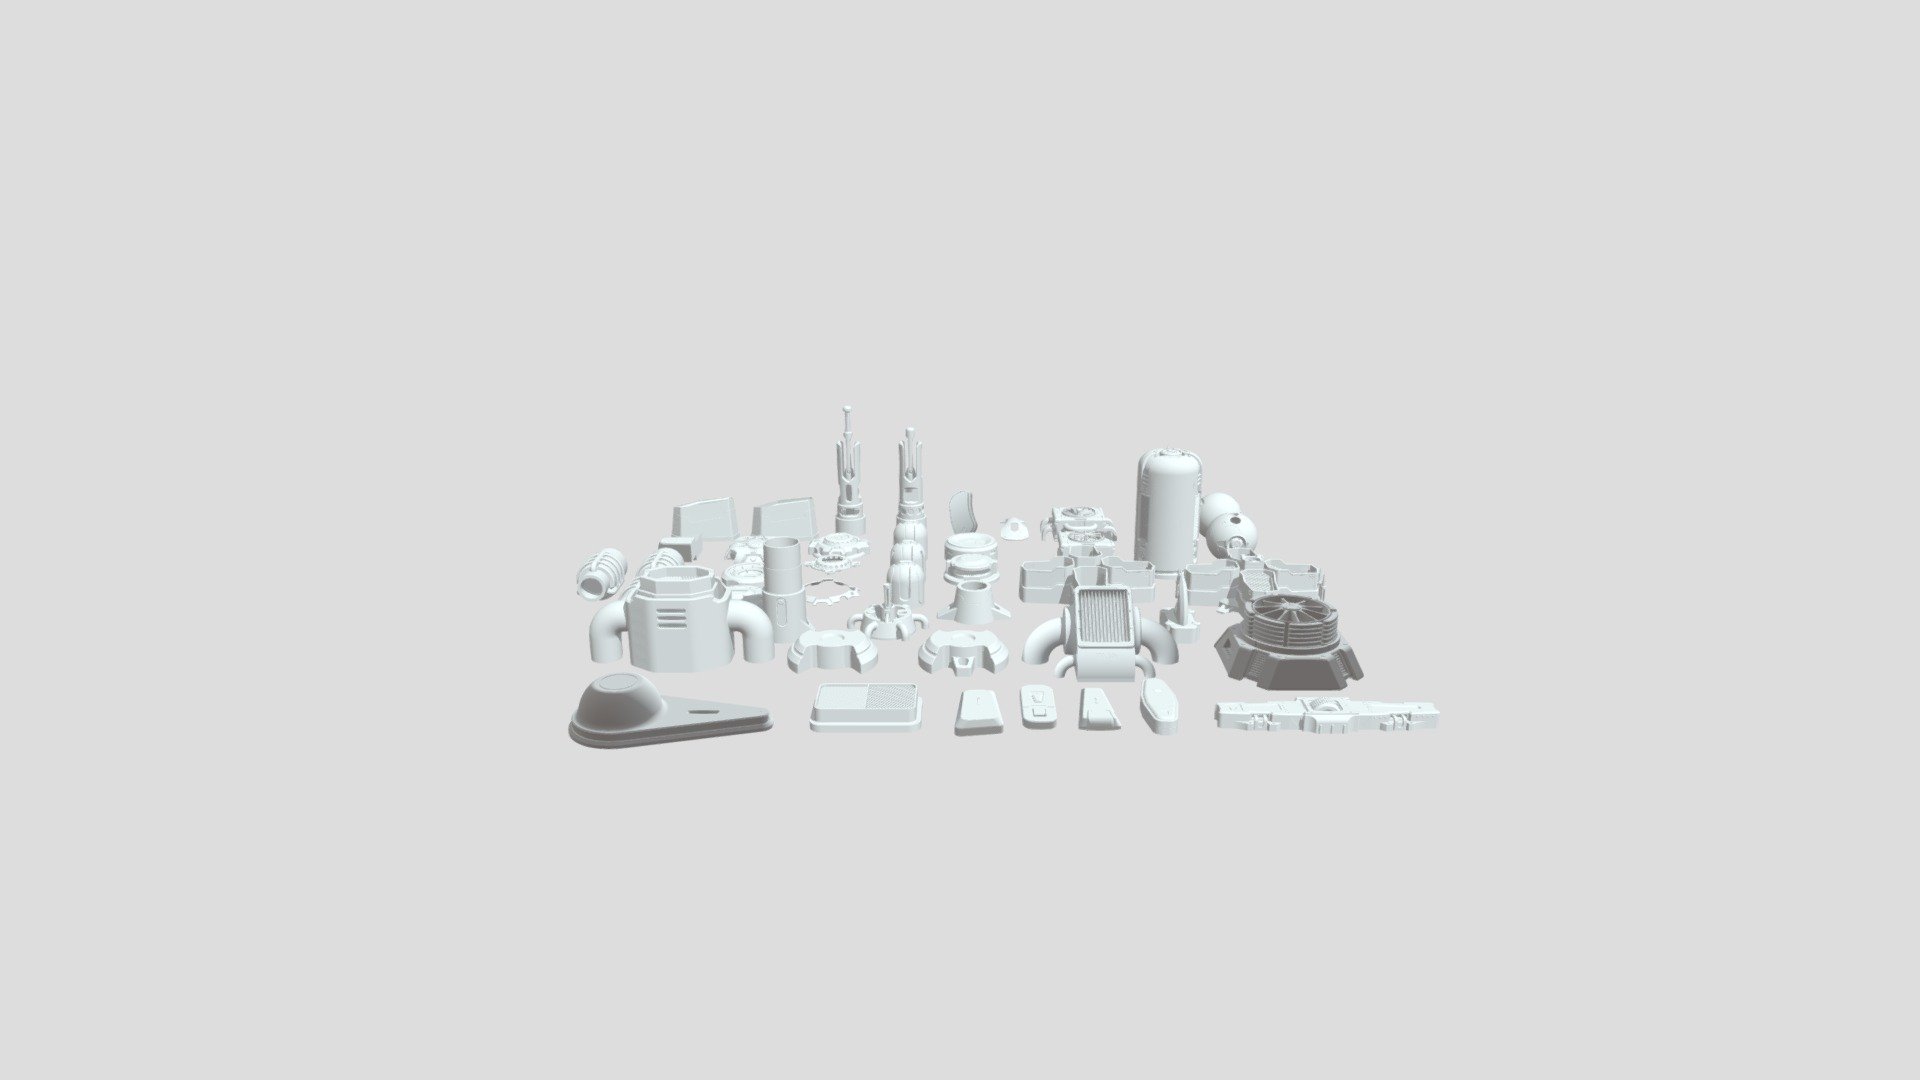 Pack Kitbash 3d model. details of futuristic buildings of suits and other hard surfaces
ventilation and turbines
Sci Fi Clasps
rivets
imitation of Scifi architecture
reactors
base
wall elements
antennas
buildings - Pack Kitbash 3d model details - 3D model by Evgeniy.Jam 3d model